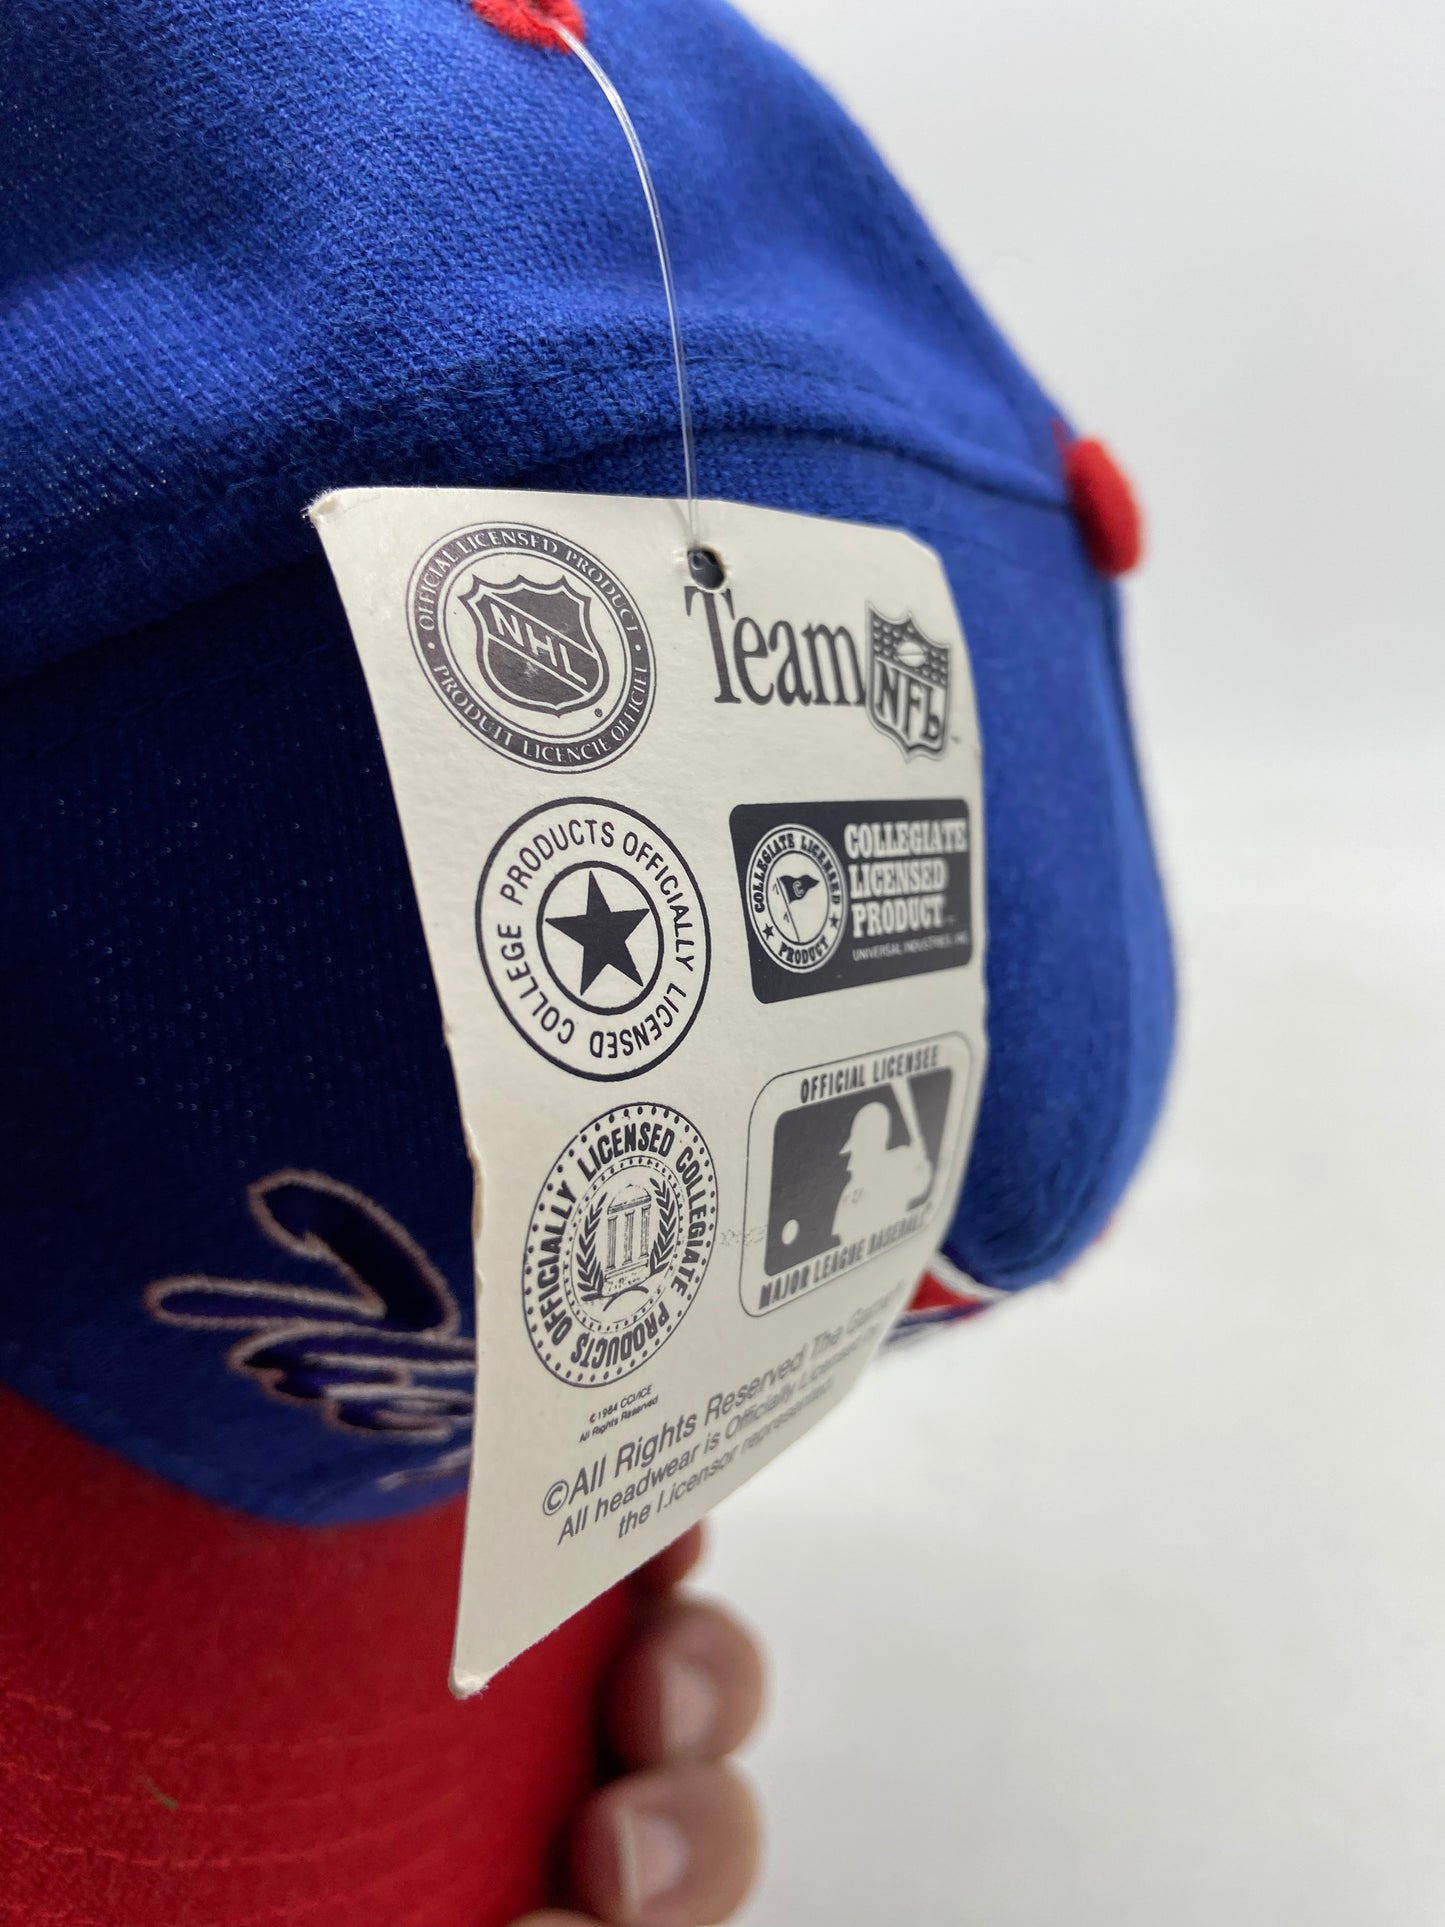 Load image into Gallery viewer, VTG The Game Wool Brand New W/ Tags Snapback
